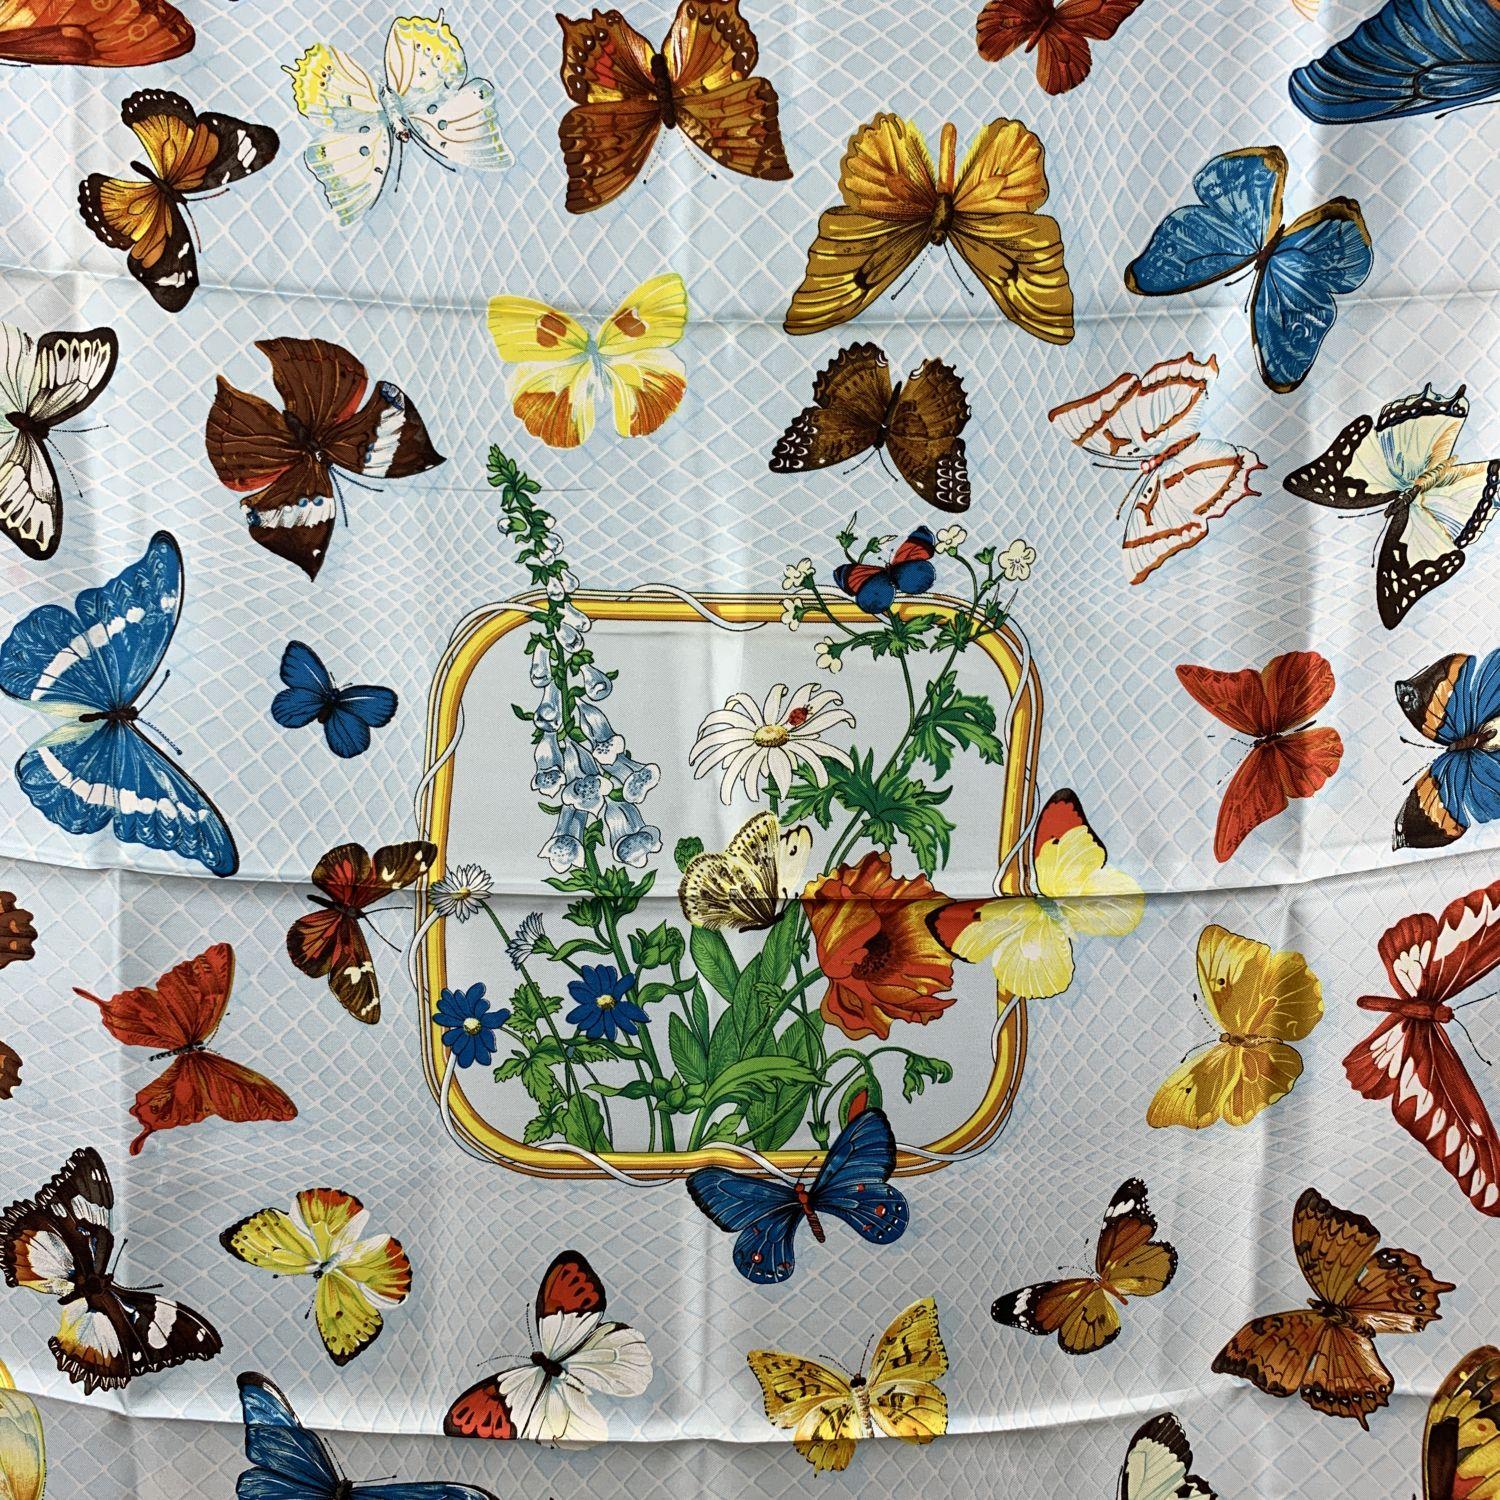 Vintage HERMES Silk scarf named 'Farandole', created by artist Caty Latham, and first issued in 1985. It was re-issued in 1990 and in 2006. Beautiful butterflies design. Red border. 100% Silk. Hand rolled edges. Approx measurements: 35 x 35 inches -